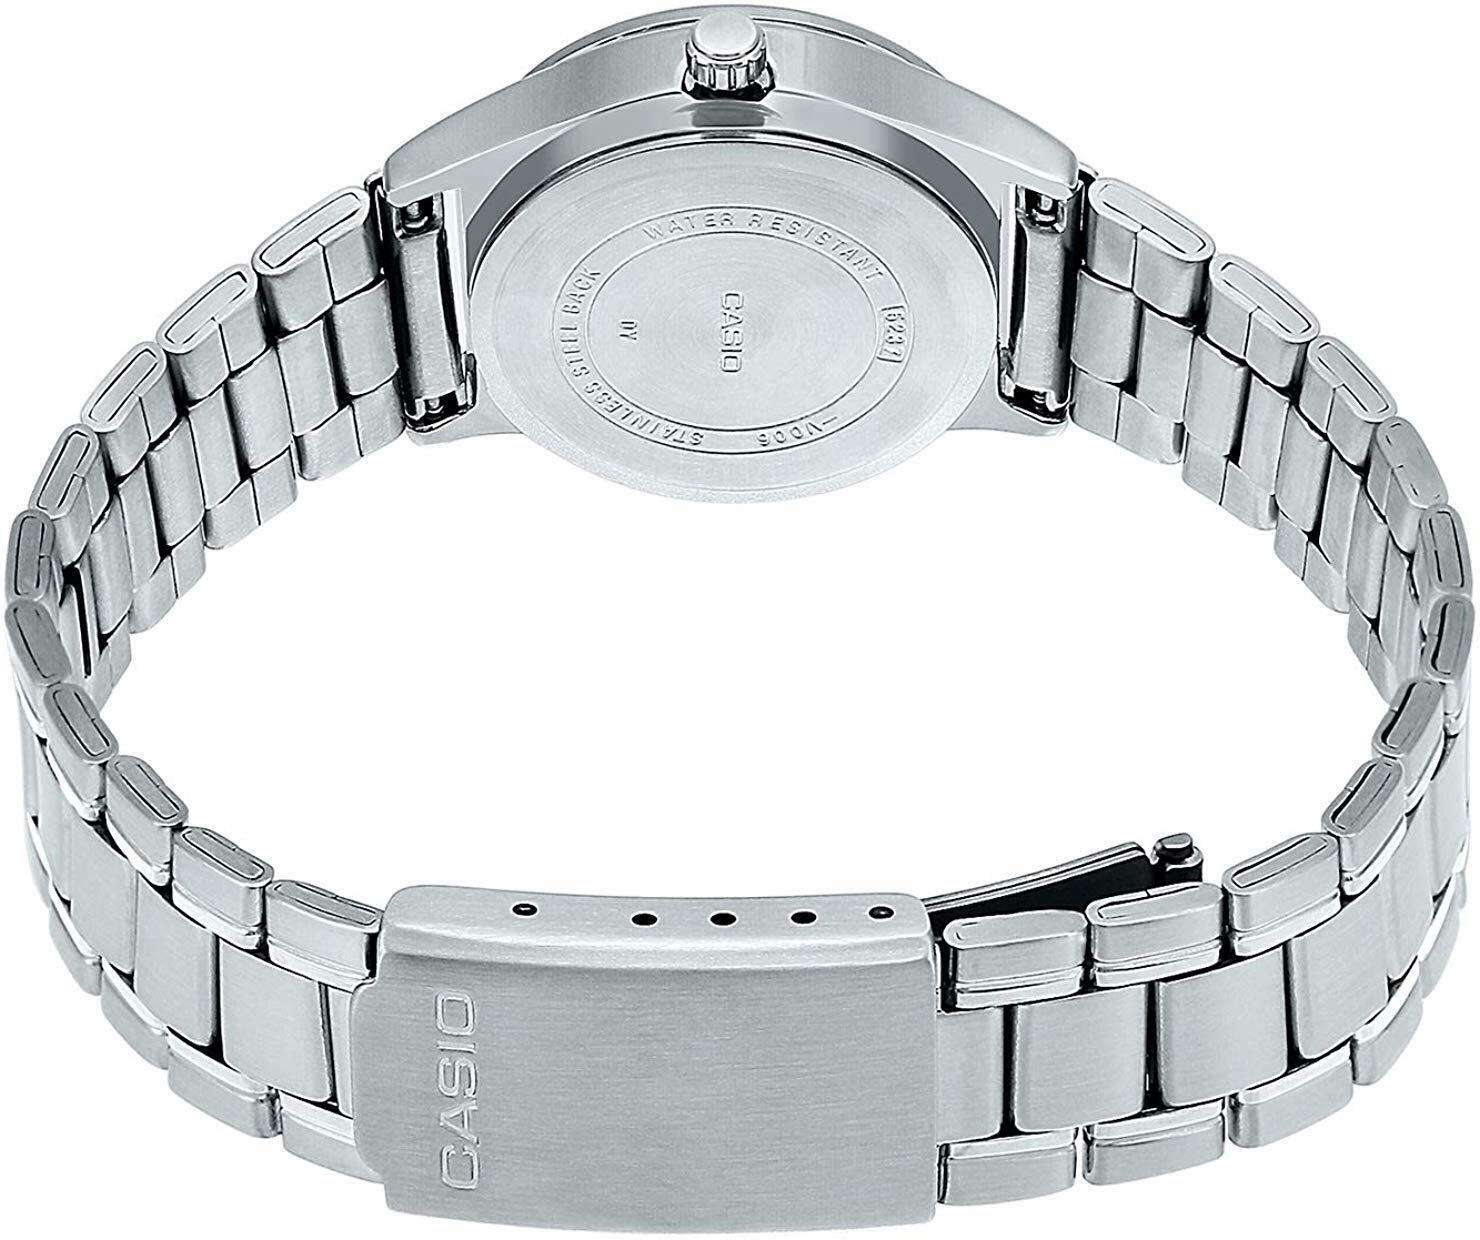 Casio MTP-V006D-1B2 Silver Stainless Watch for Men-Watch Portal Philippines